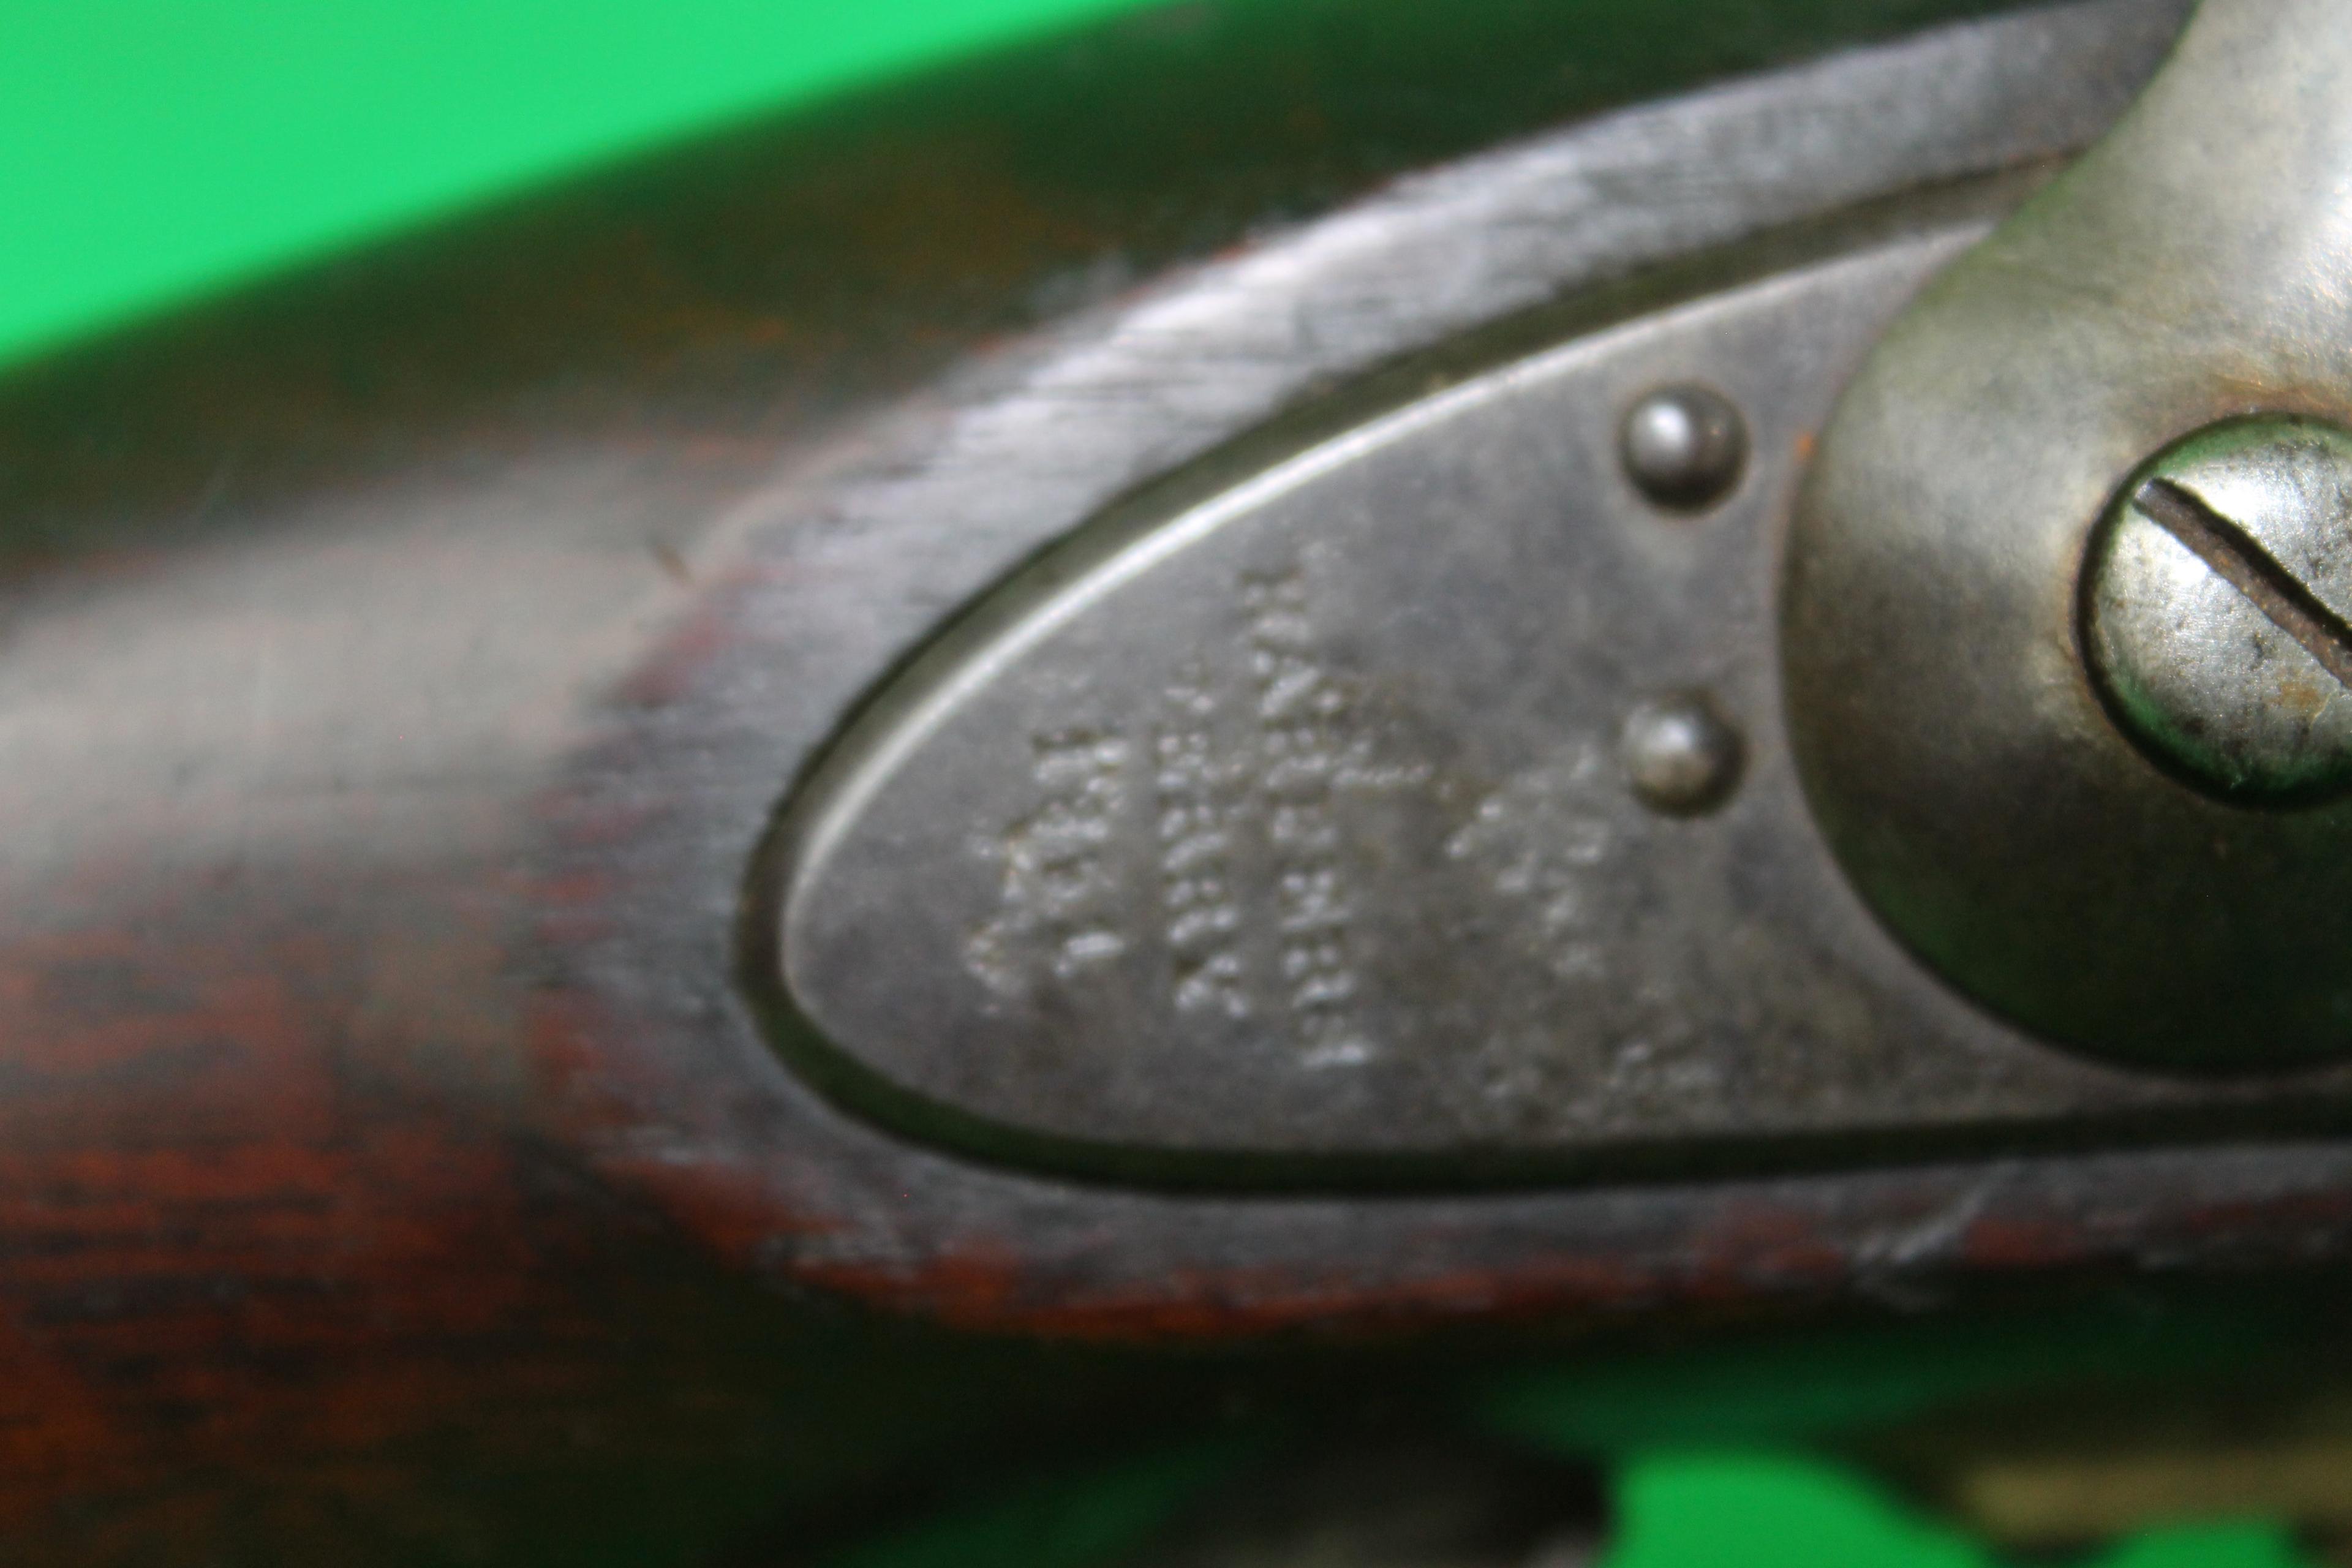 Us Model 1841 Harpers Ferry 1852 Mississippi Rifle